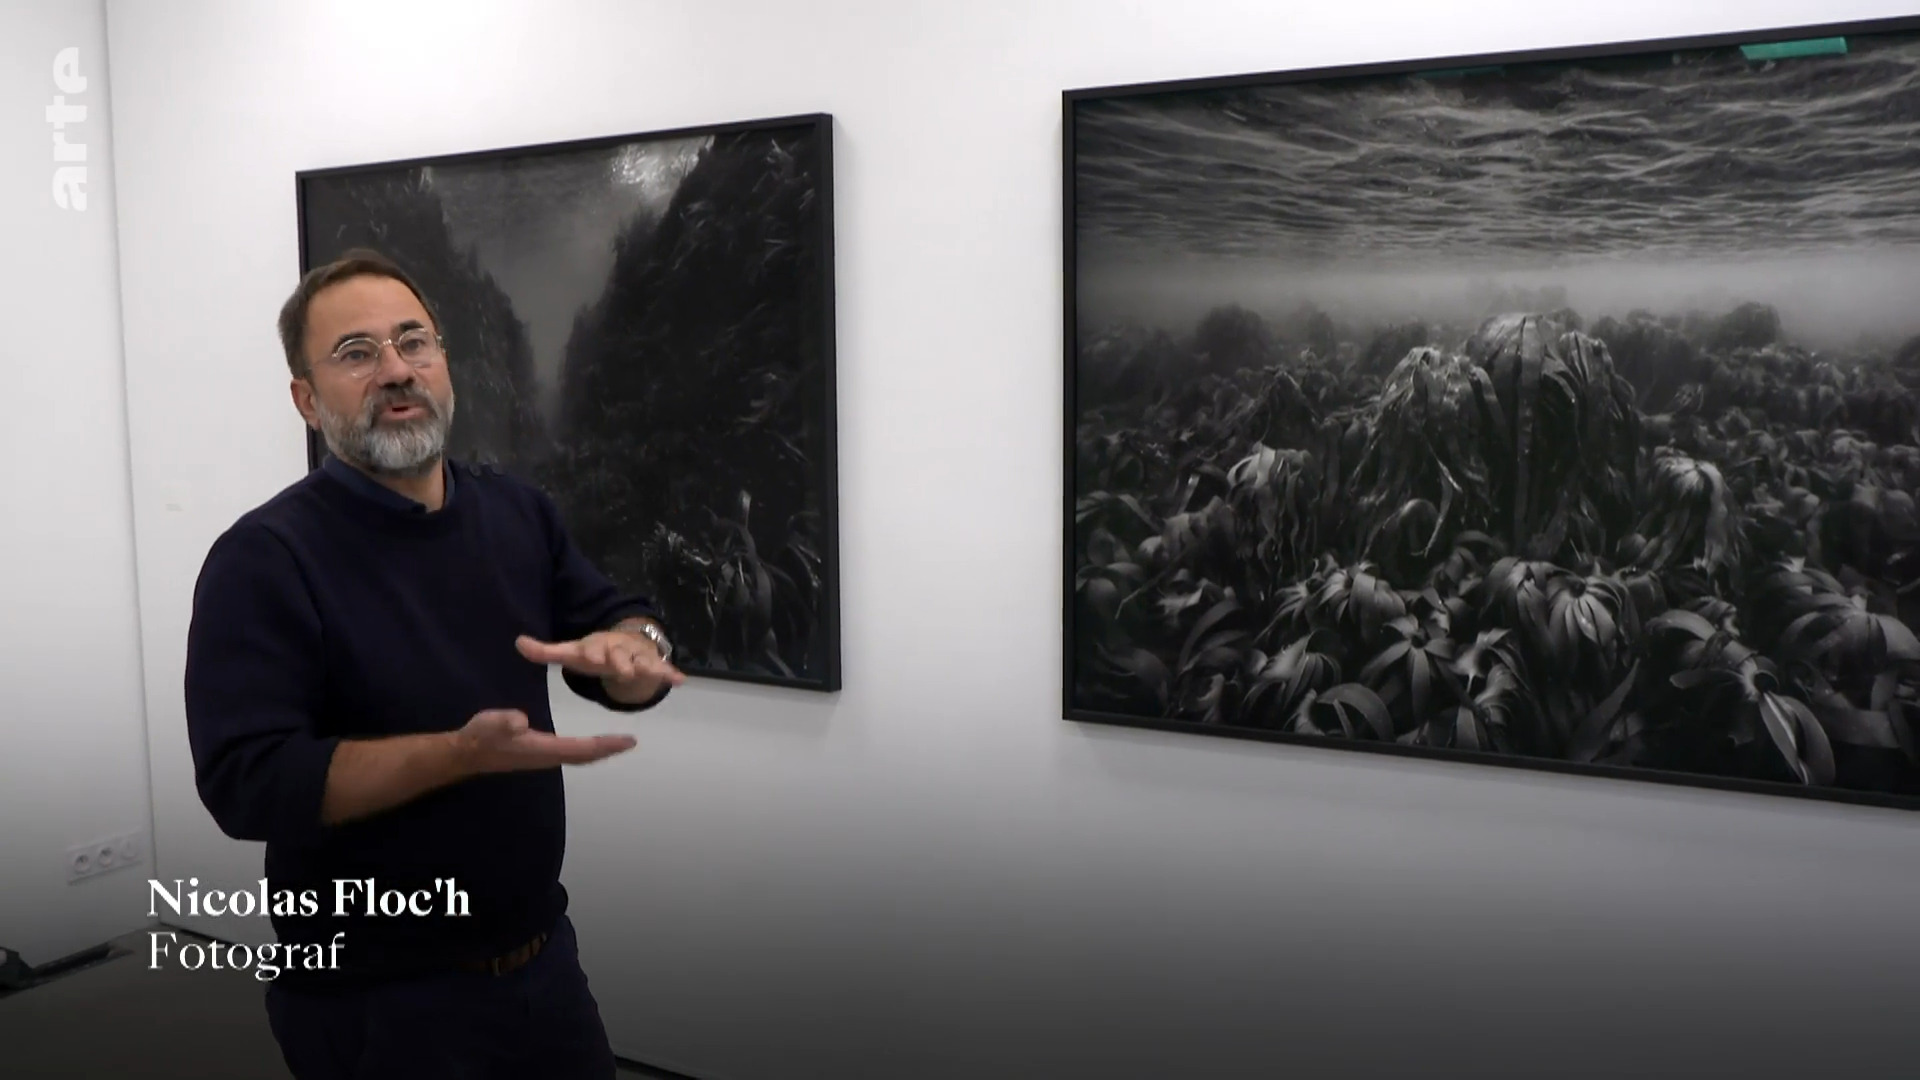 Screenshot from Arte: the photographer in front of two framed photographs in a gallery space. He's gesturing, the photographs are majestically dark.